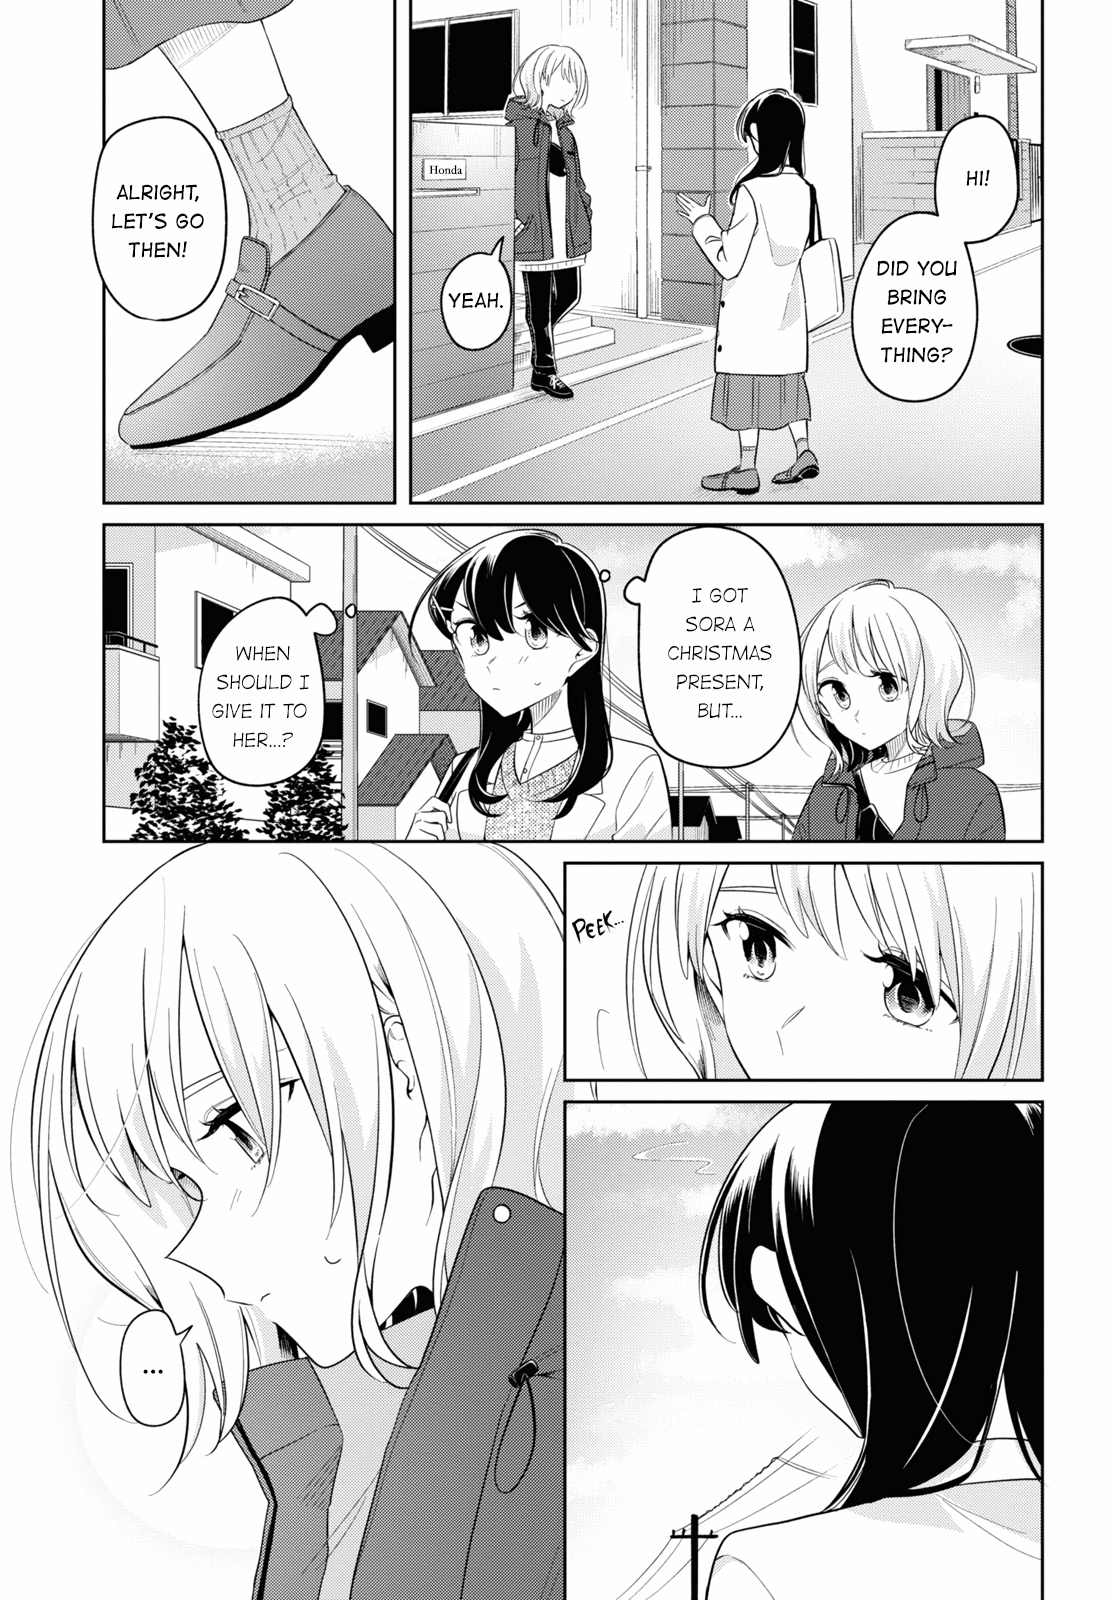 Can't Defy The Lonely Girl - Page 1